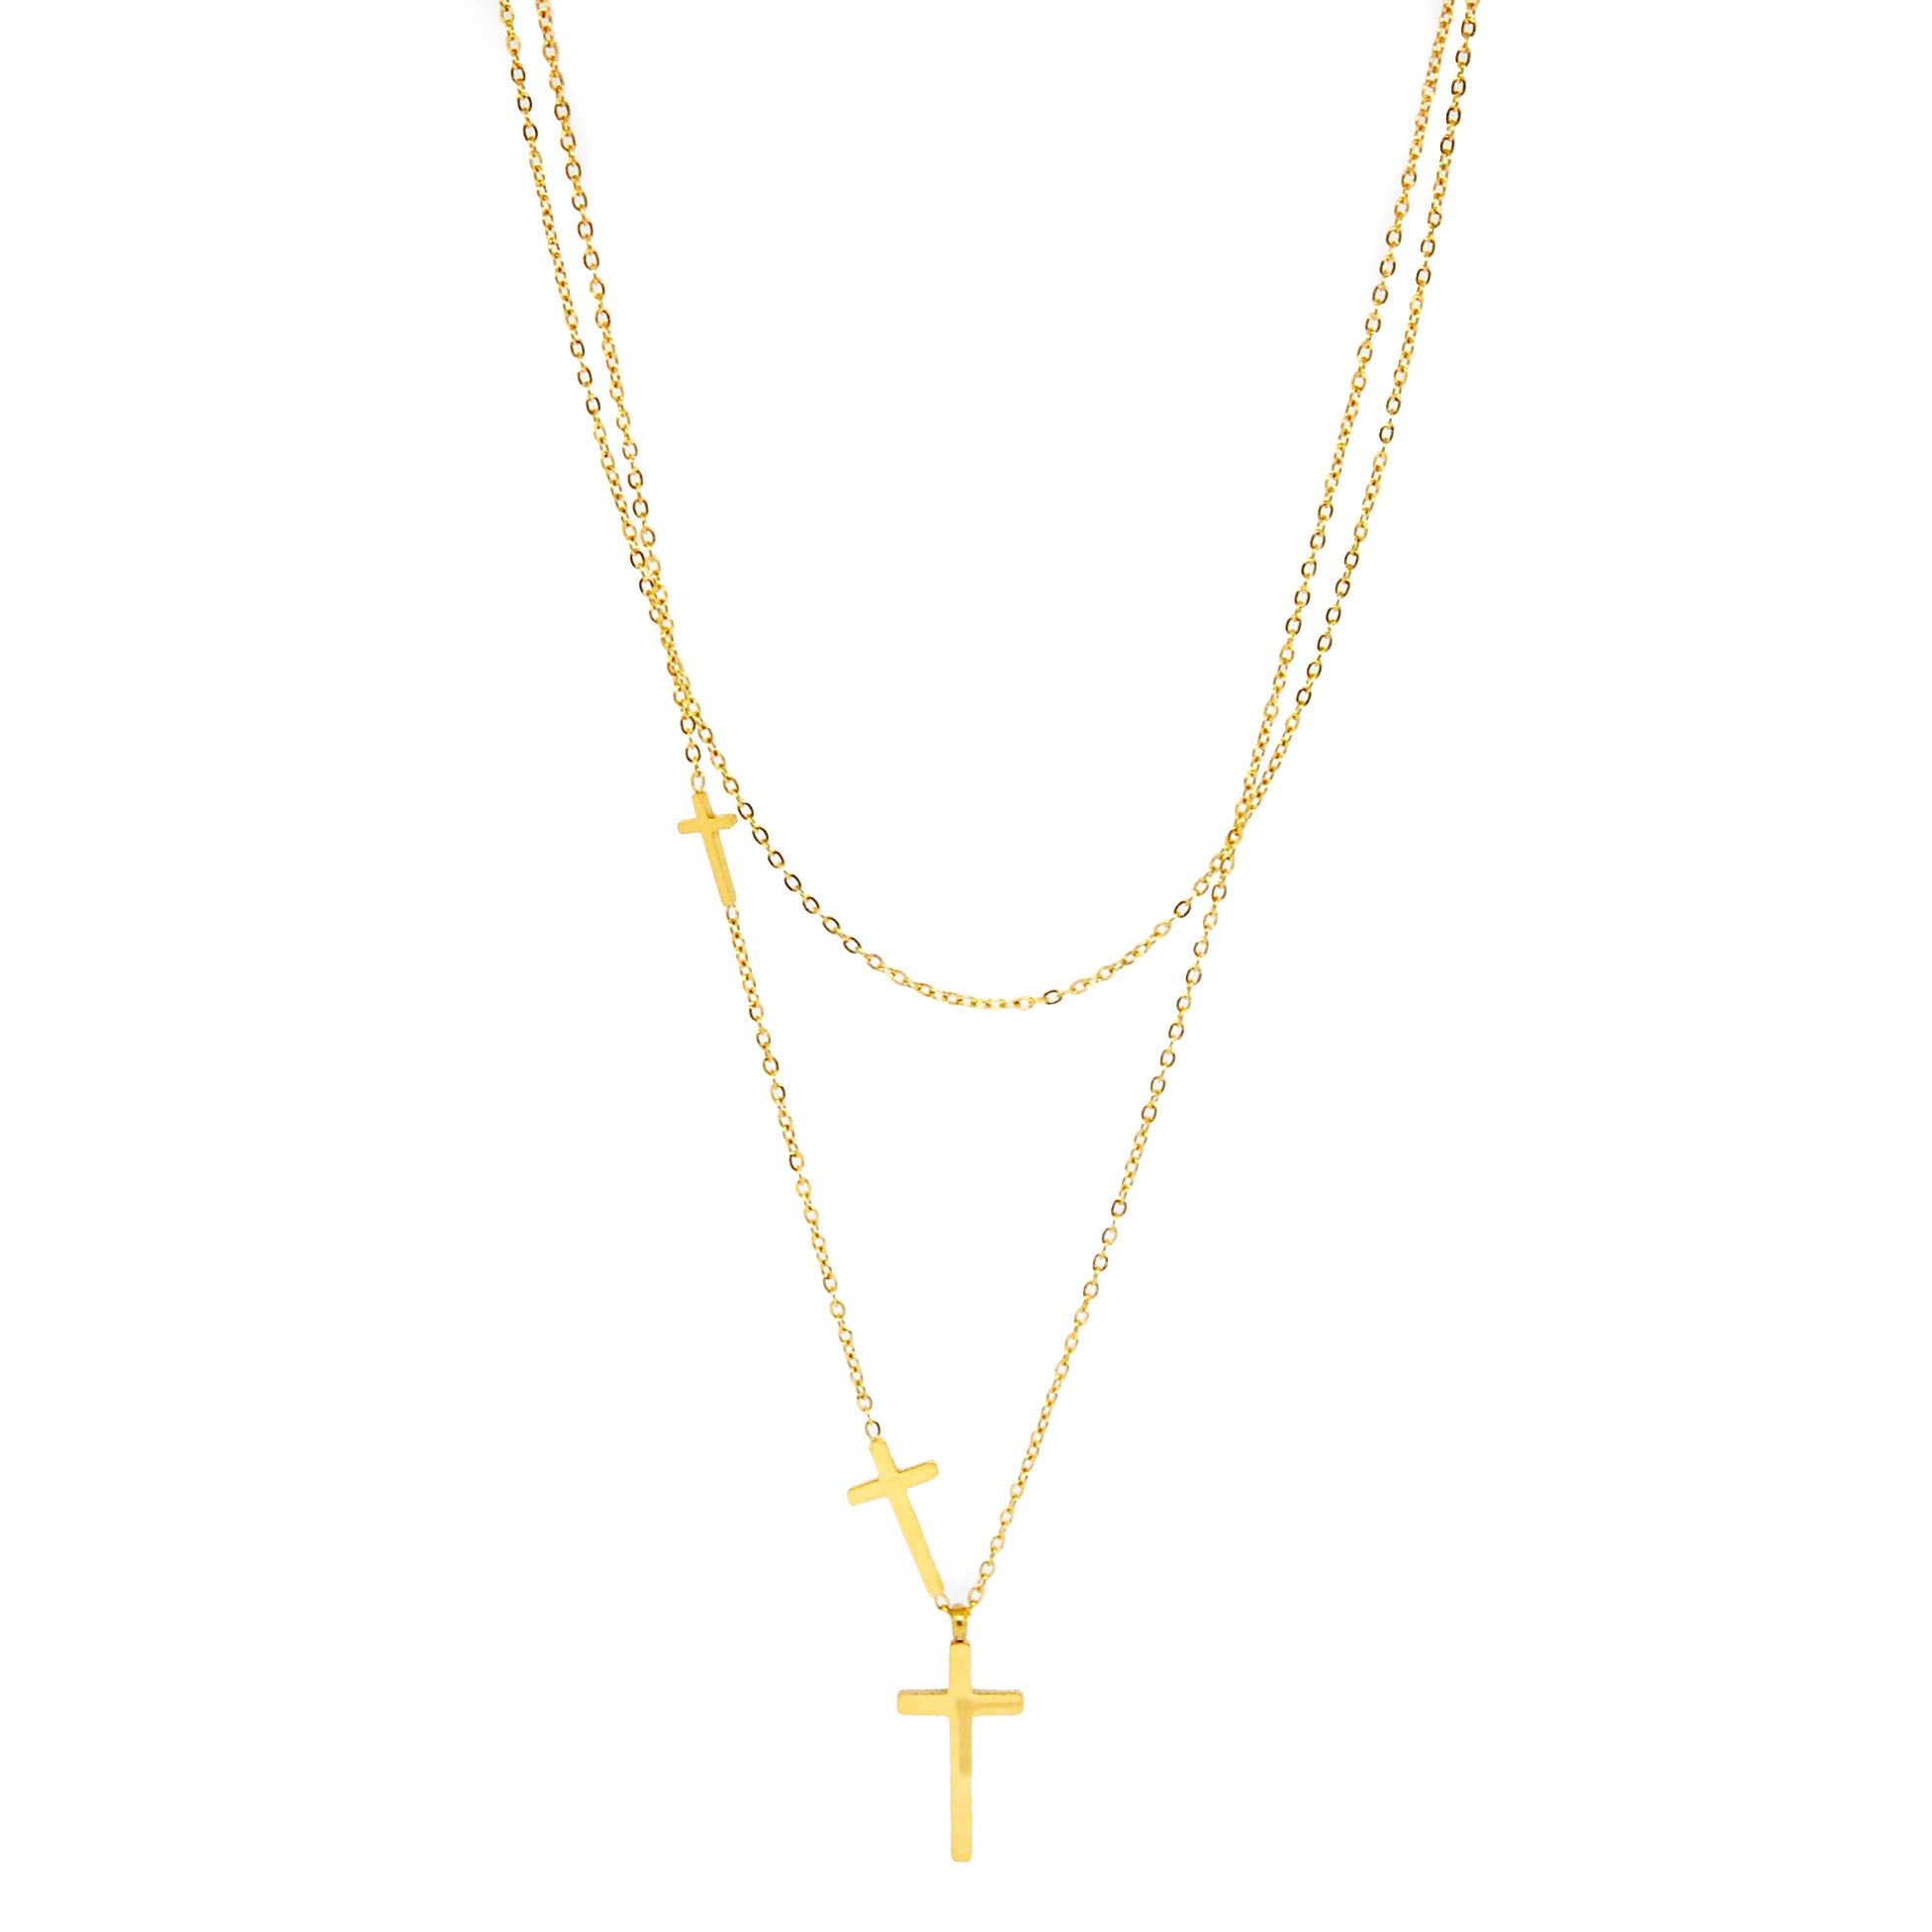 ESE 7832: All IPG Double Cross Elegant Necklace